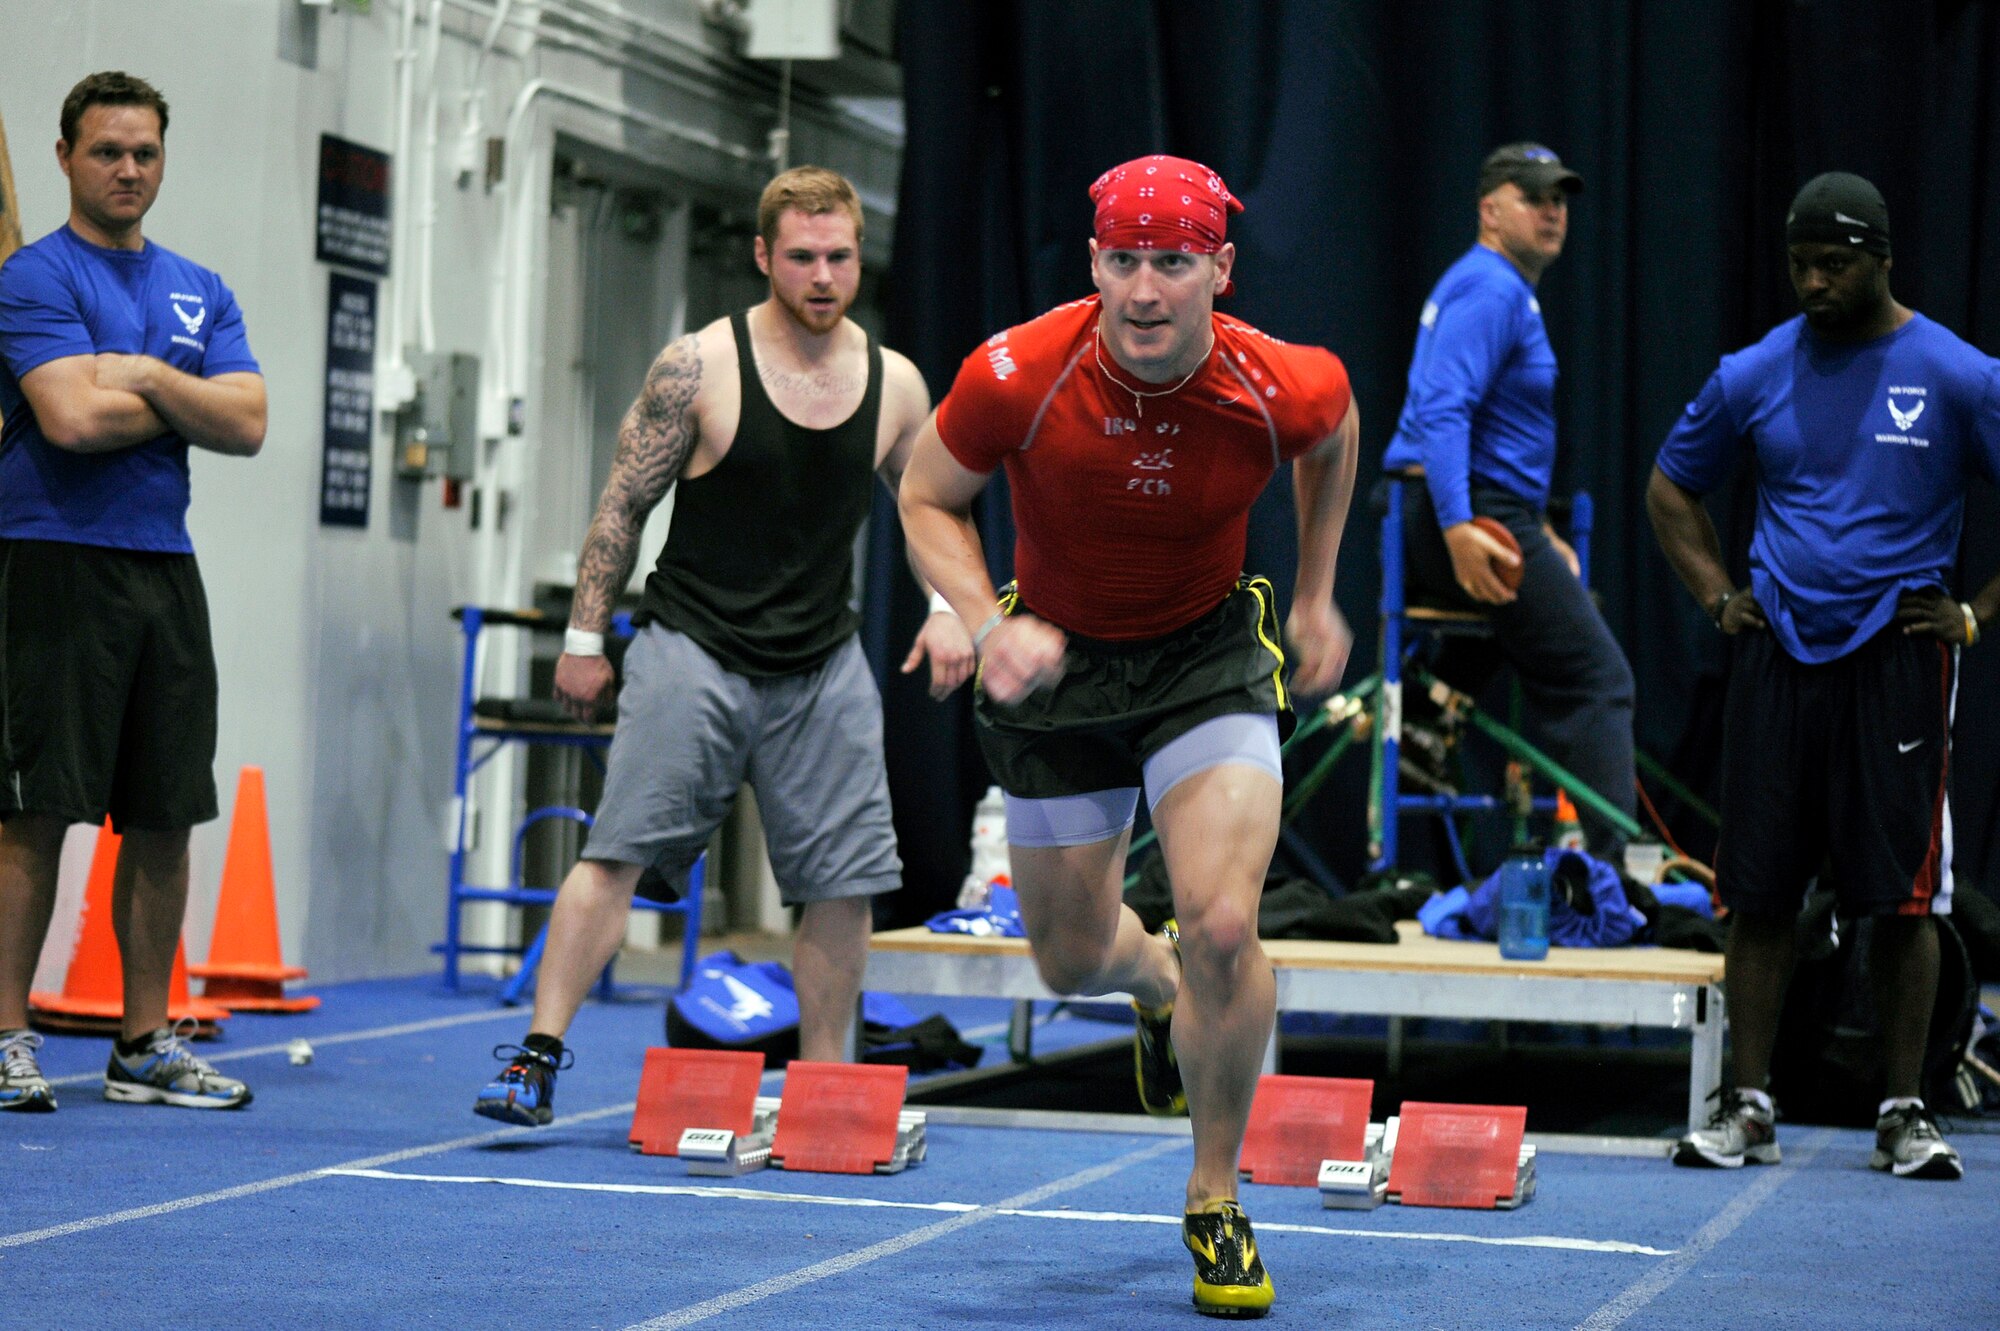 Capt. Mitchell Kieffer sprints at the Academy indoor track during the Wounded Warrior Games Training Camp held in Colorado Springs, Colo., April 17, 2013. (U.S. Air Force photo/Desiree N. Palacios)